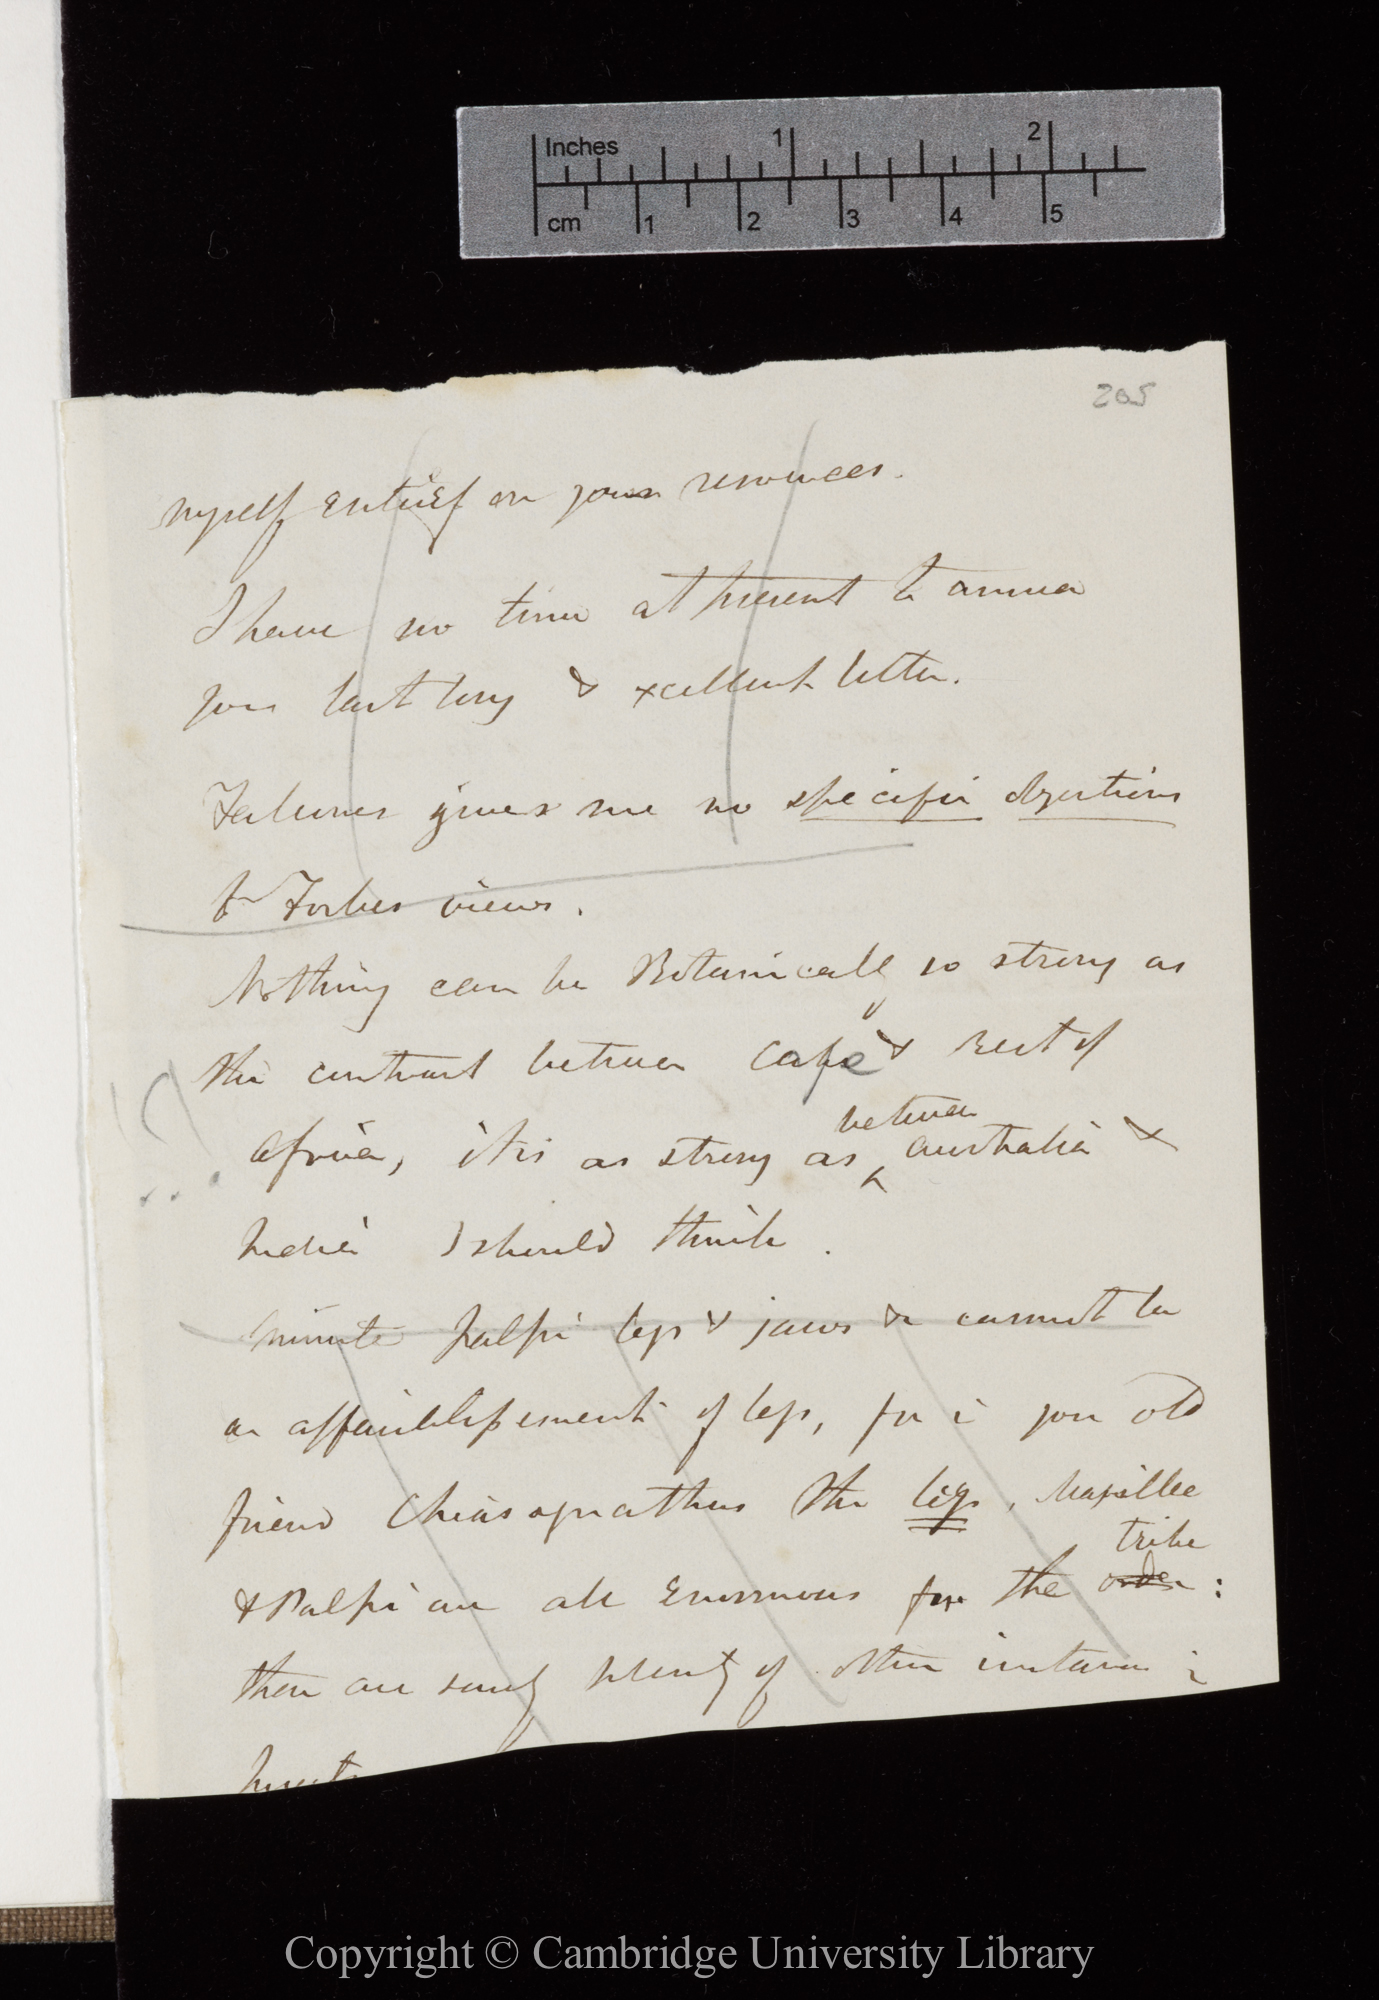 Letter from J. D. Hooker to C. R. Darwin   [11-15 April 1846]